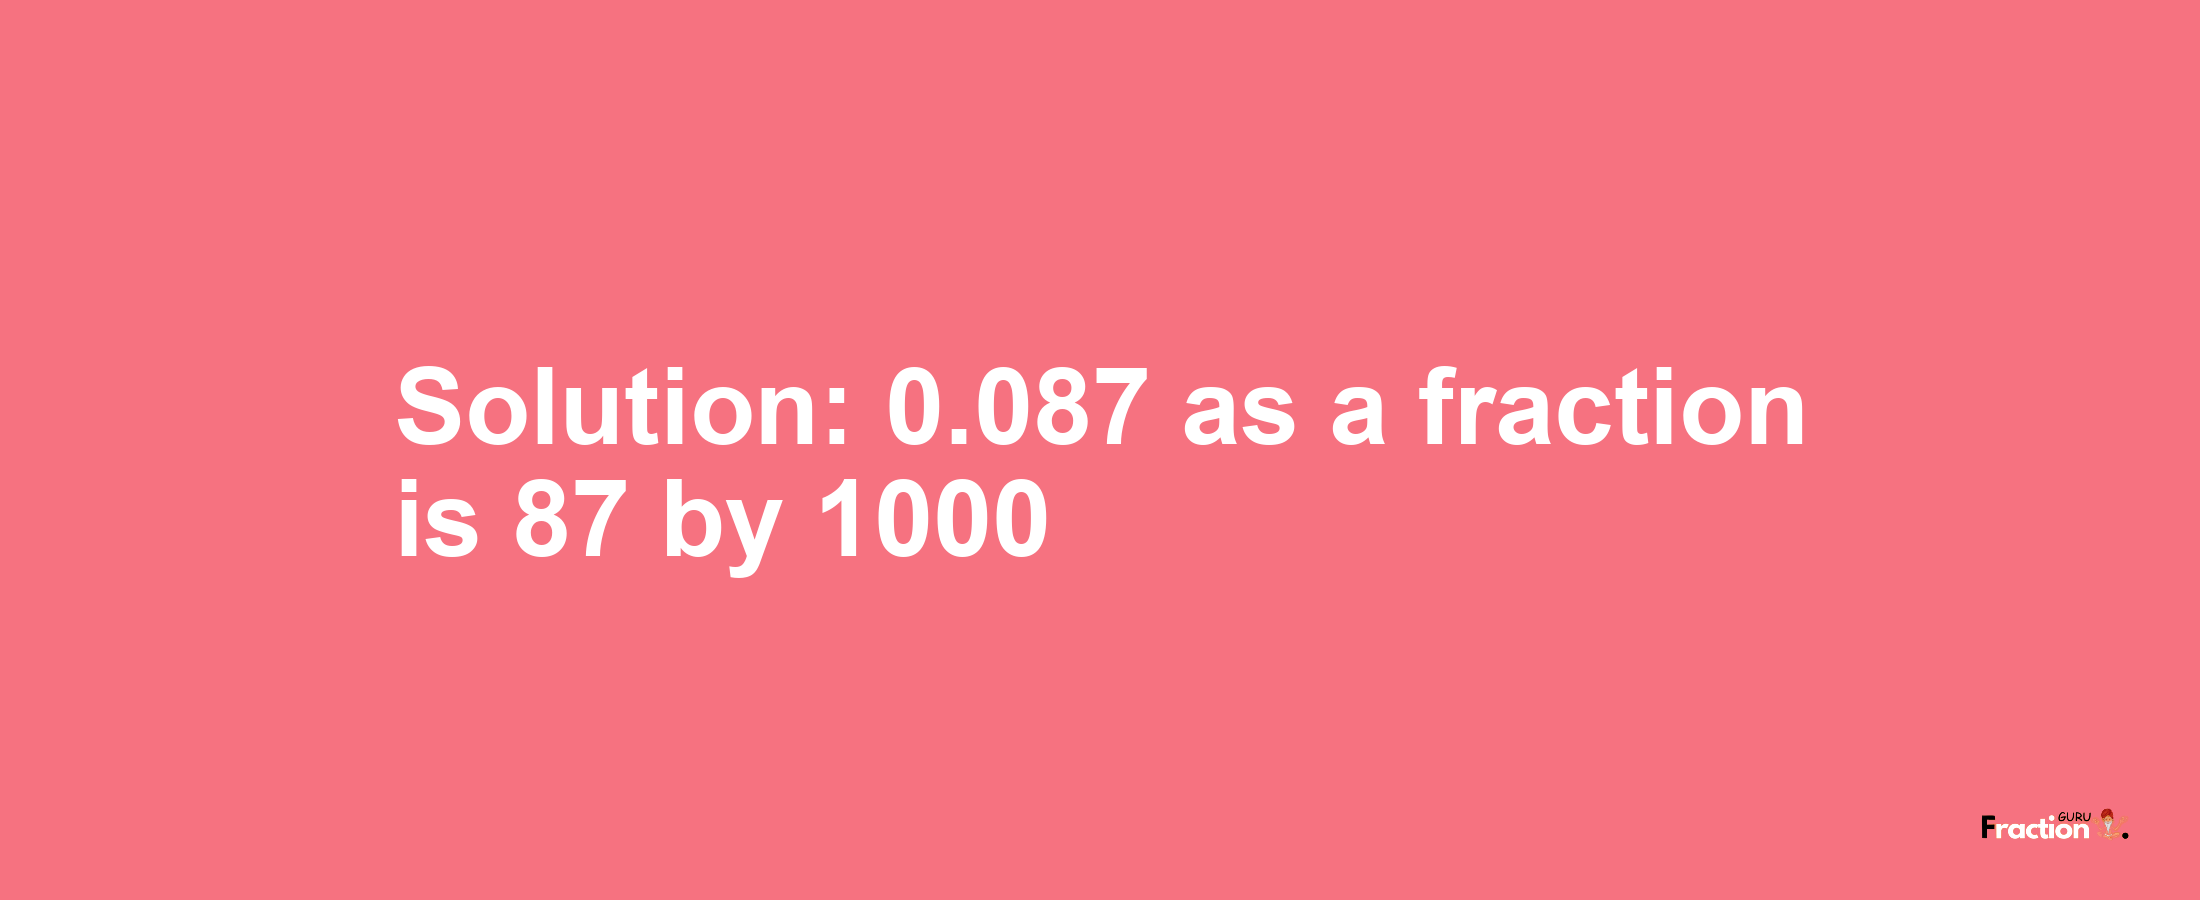 Solution:0.087 as a fraction is 87/1000